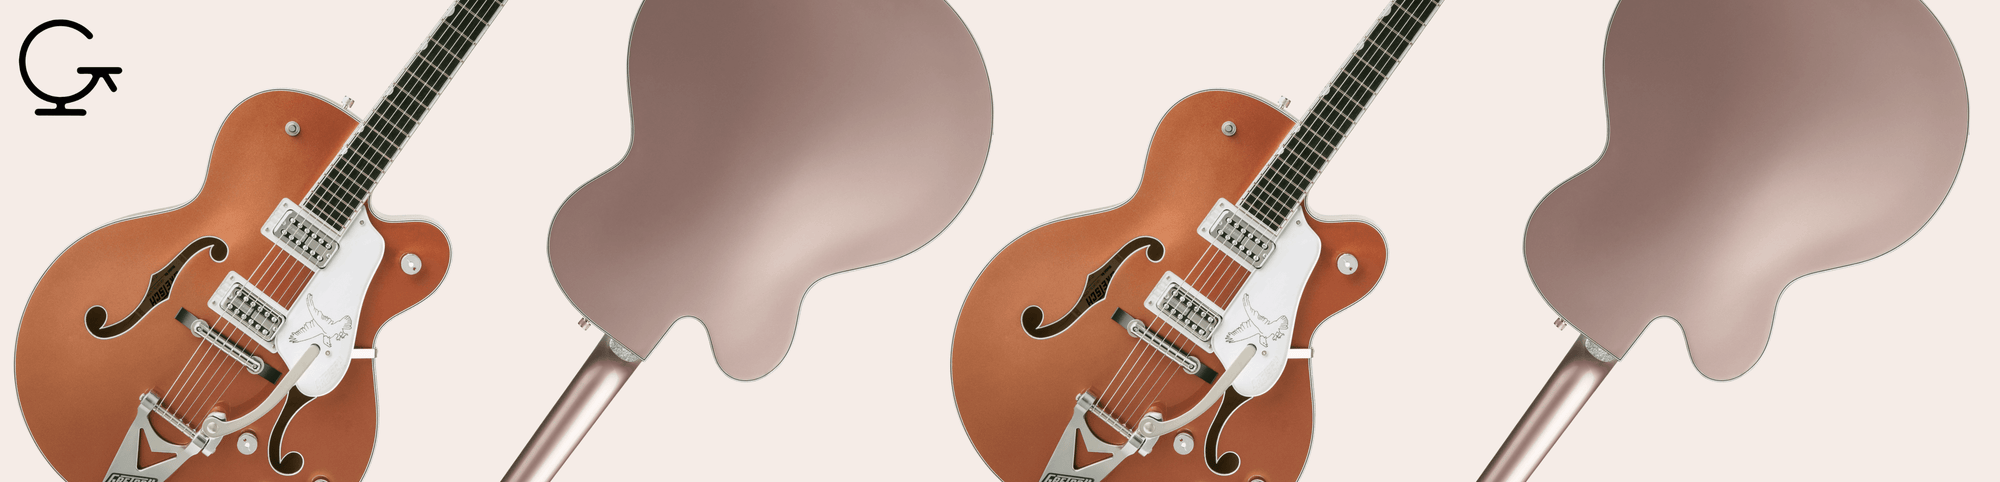 Gretsch unveil the new G6136T Limited Edition Falcon in Two-Tone Copper/Sahara Metallic-Sky Music